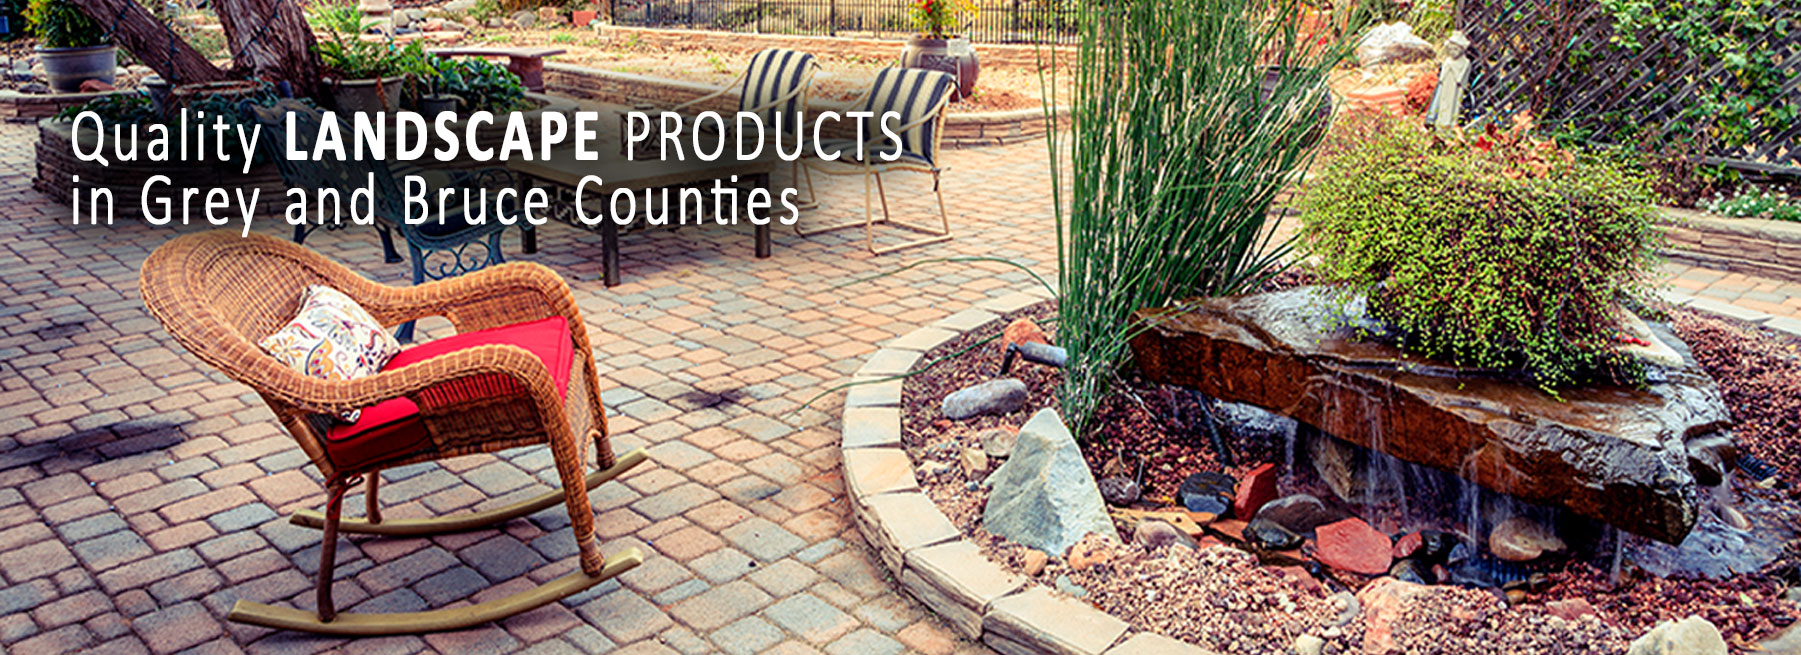 Quality Landscape Products in Grey and Bruce Counties